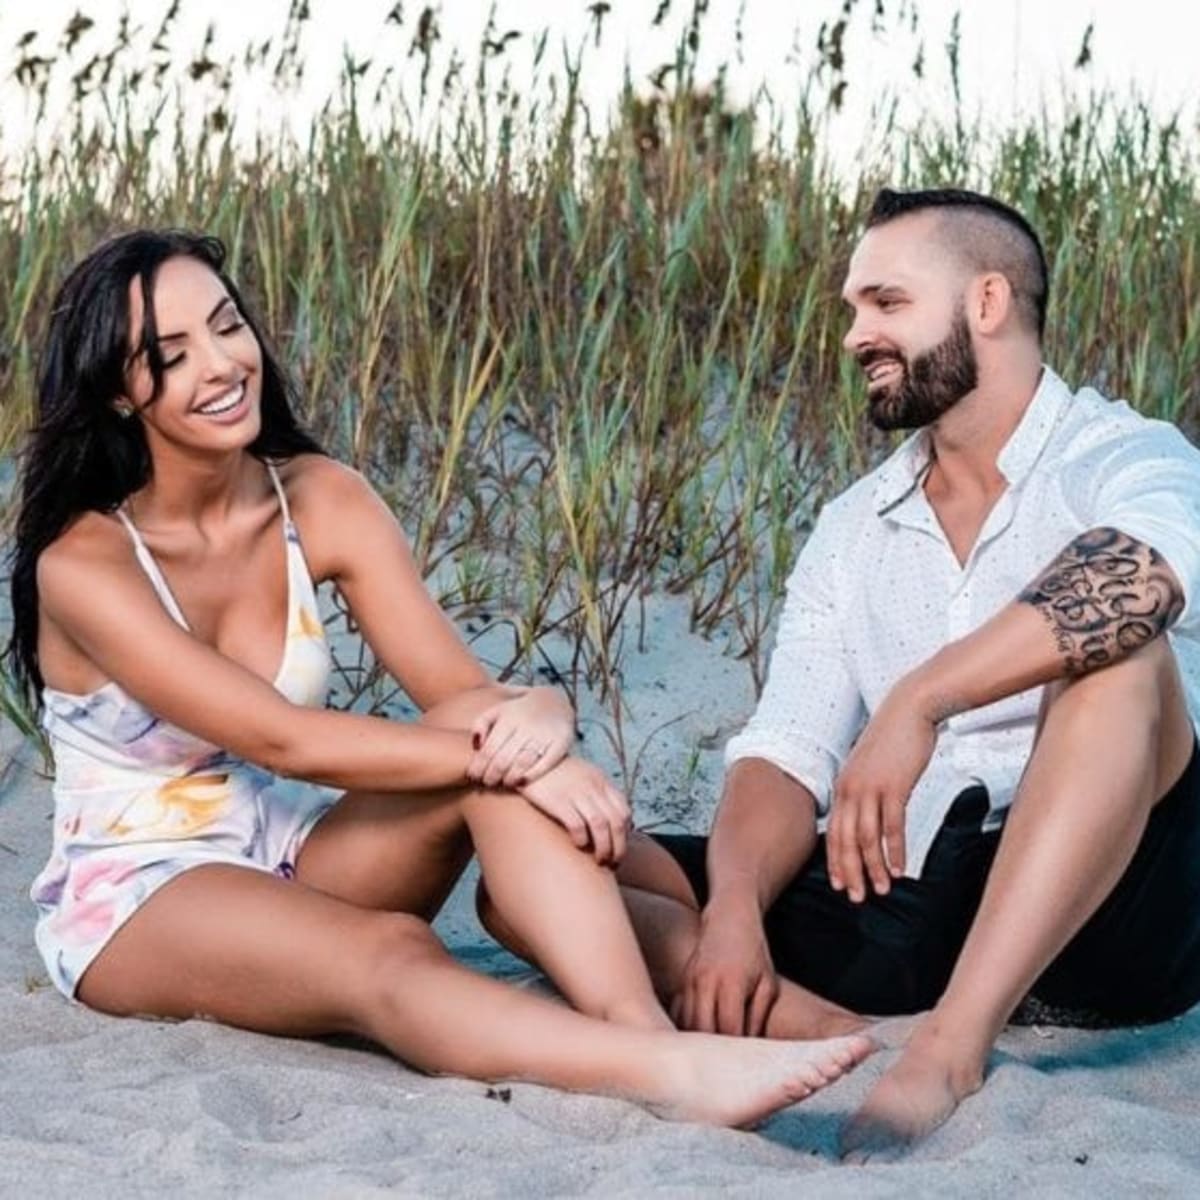 Shawn Spears on being married to Peyton Royce and what it's like for them  to be in competing companies - Wrestling News